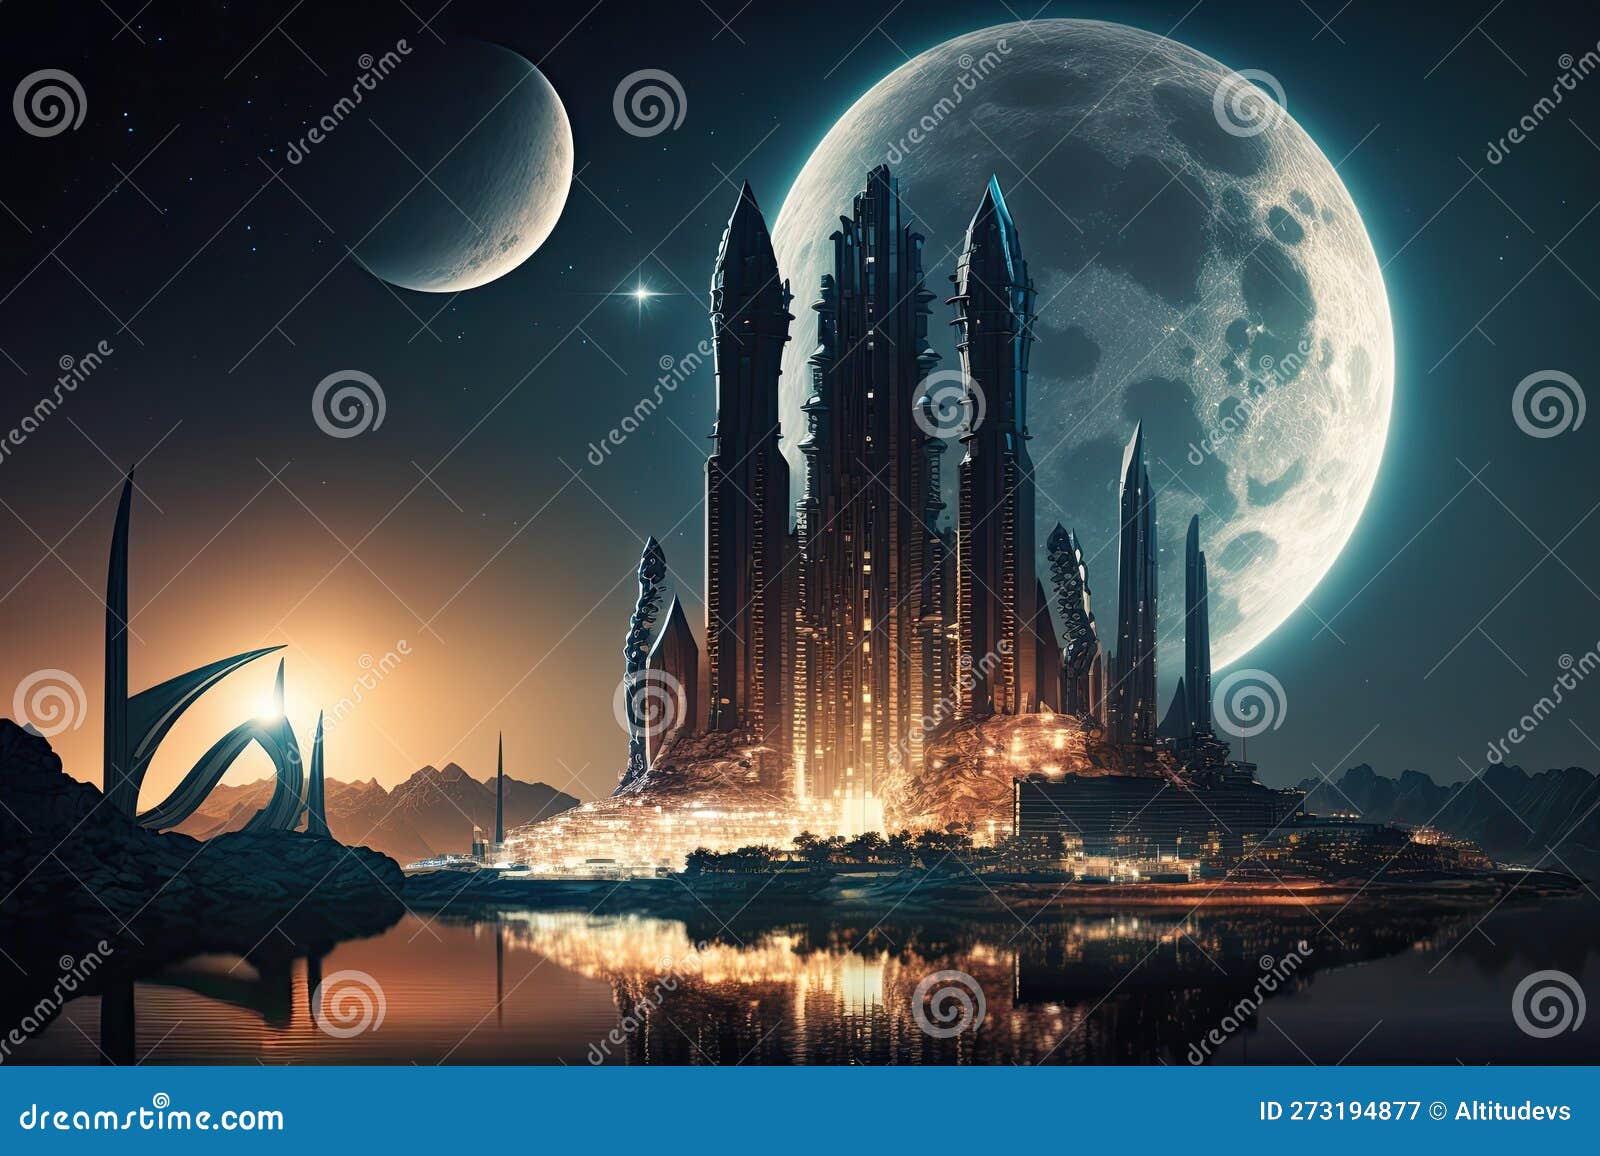 megaproject, with the city's skyscrapers and monuments illuminated by night, against silhouette of moon